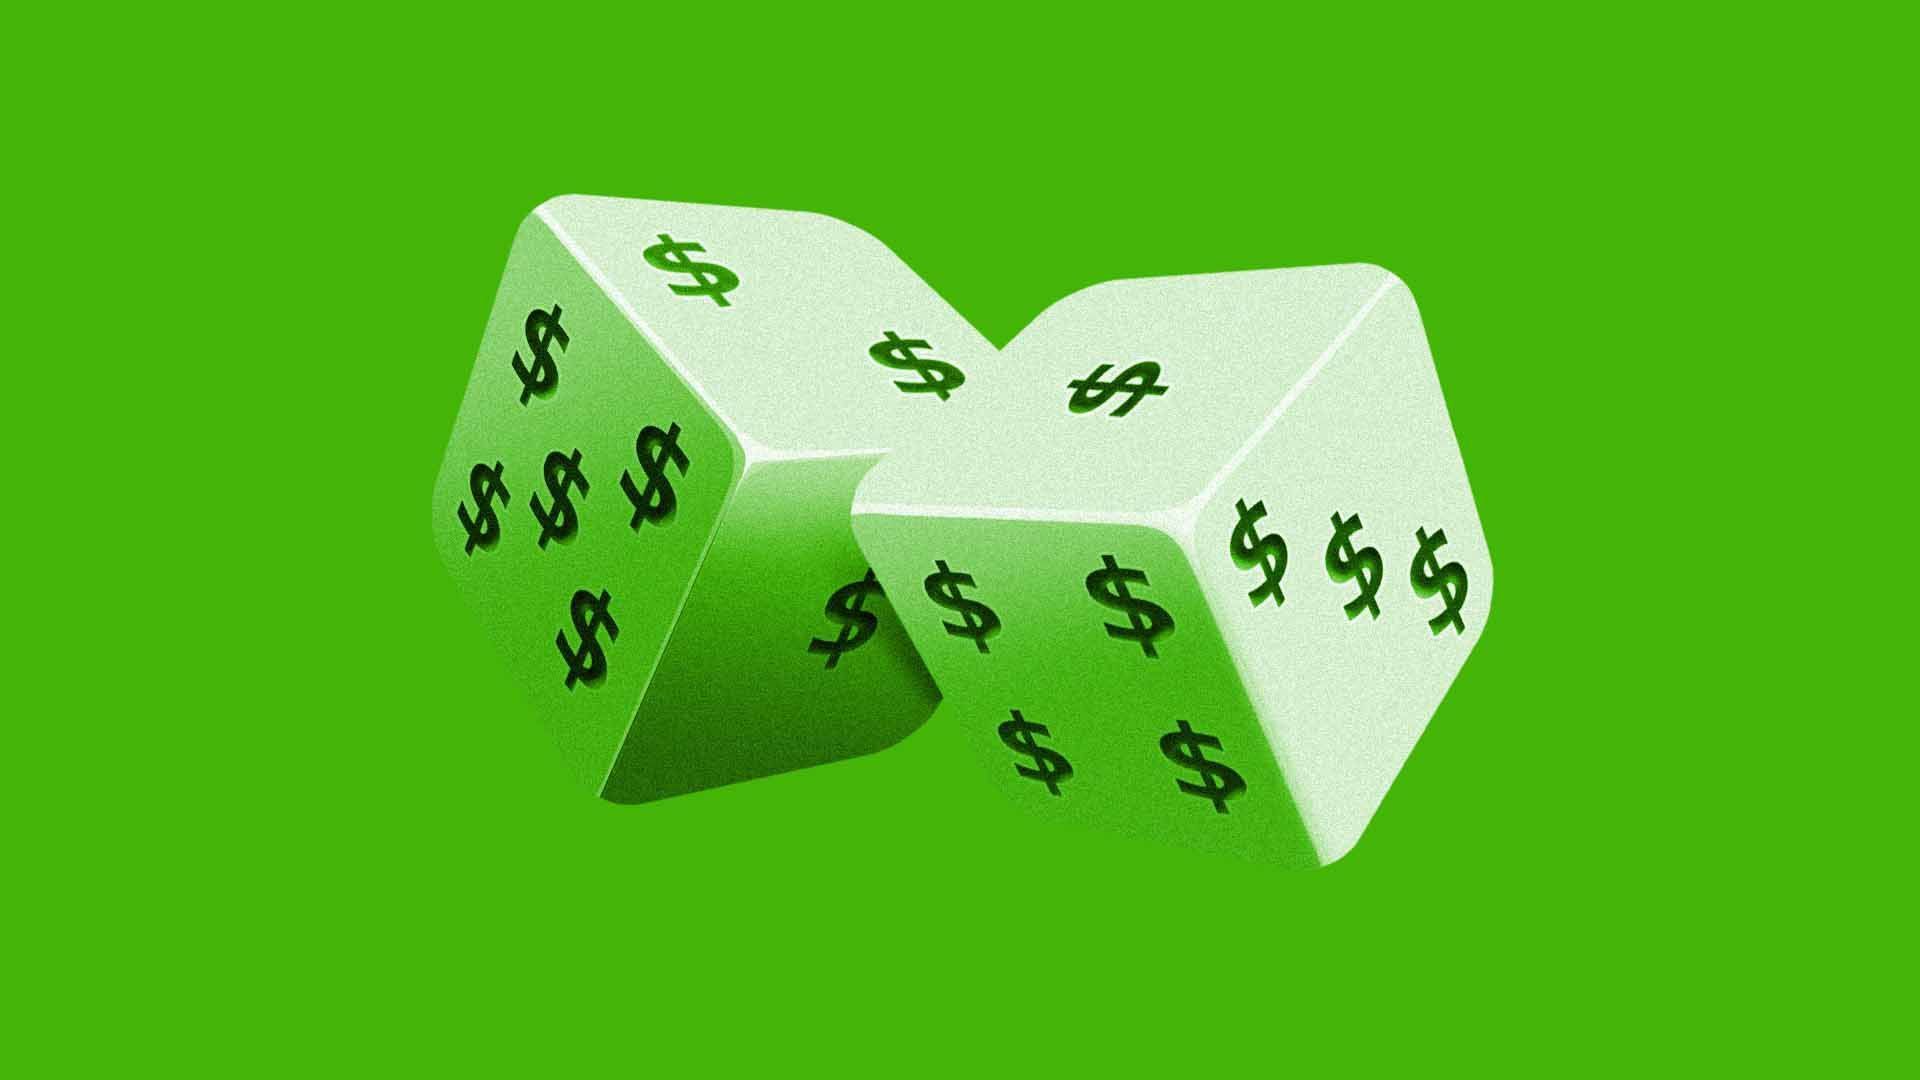 Illustration of a dice with money signs on it instead of dots.